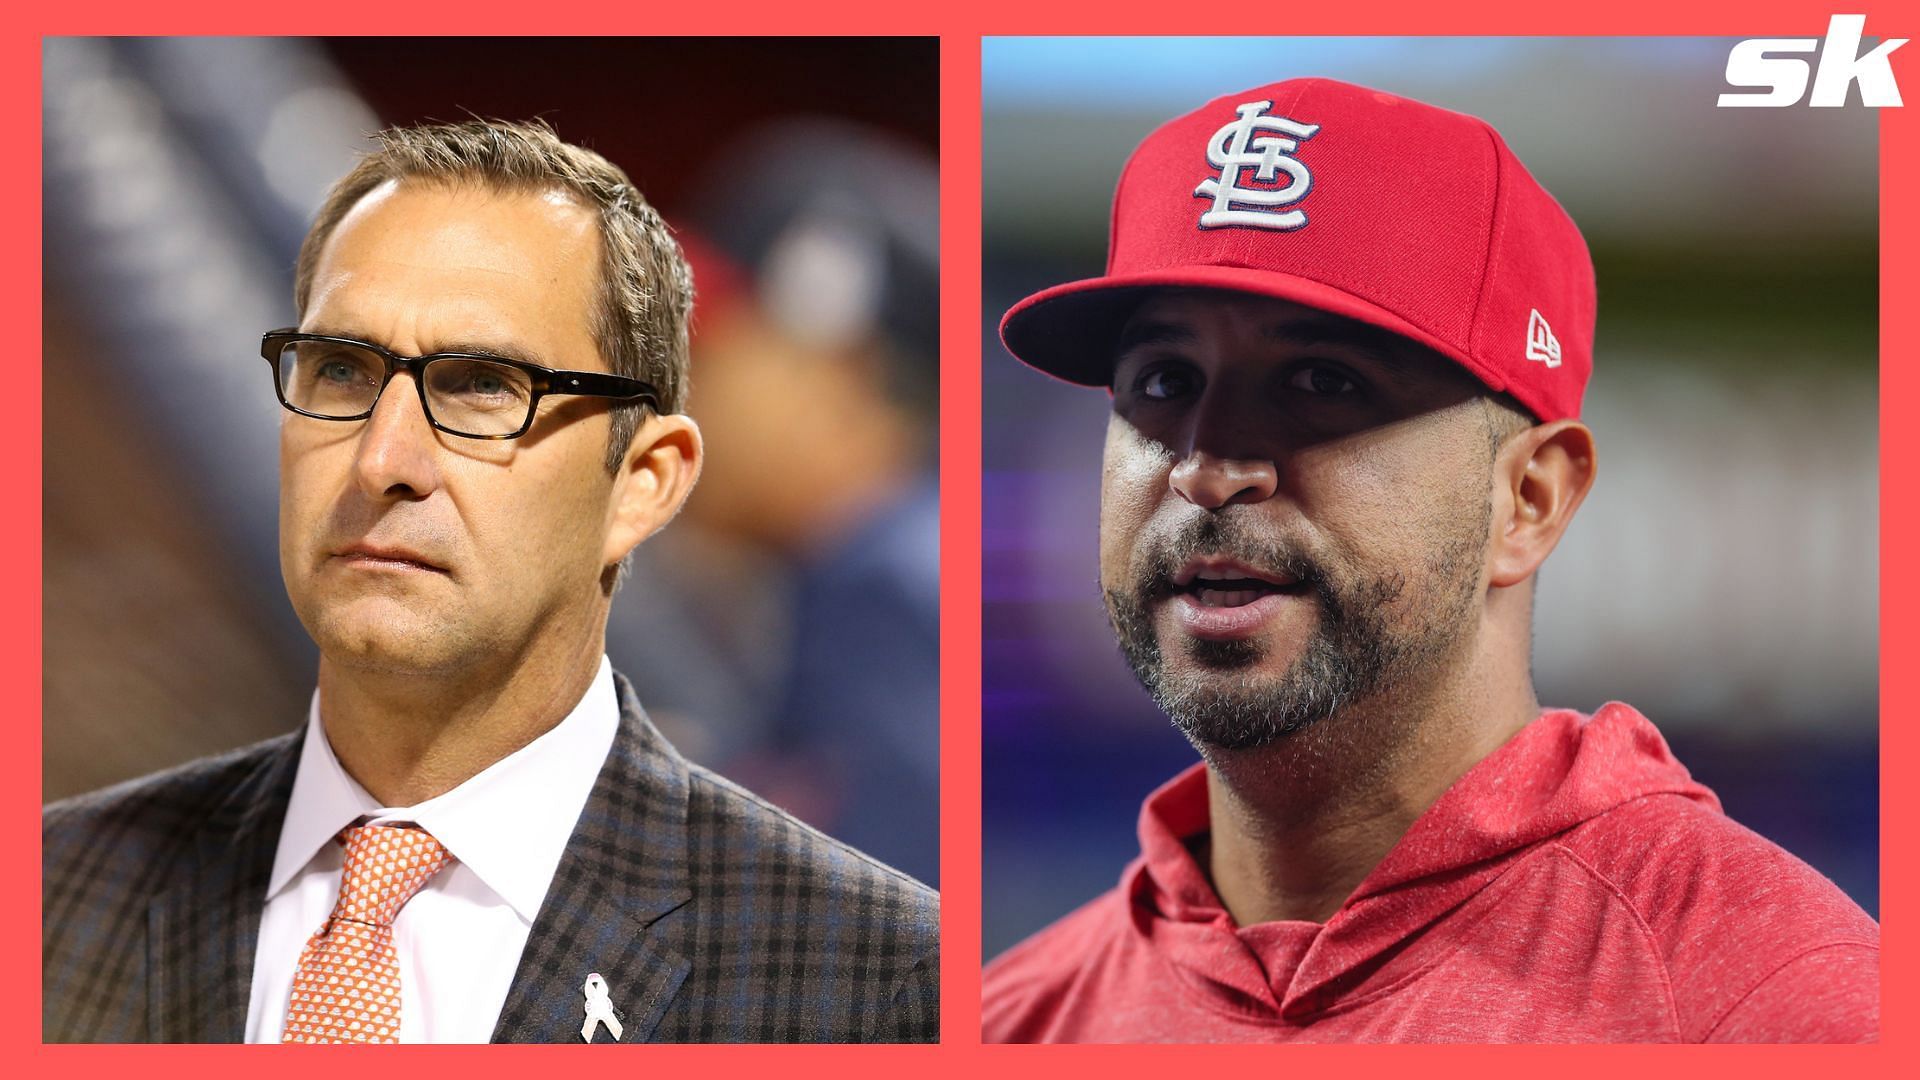 St. Louis Cardinals looking to shake up $161,000,000 payroll with trades  before deadline, hints John Mozeliak